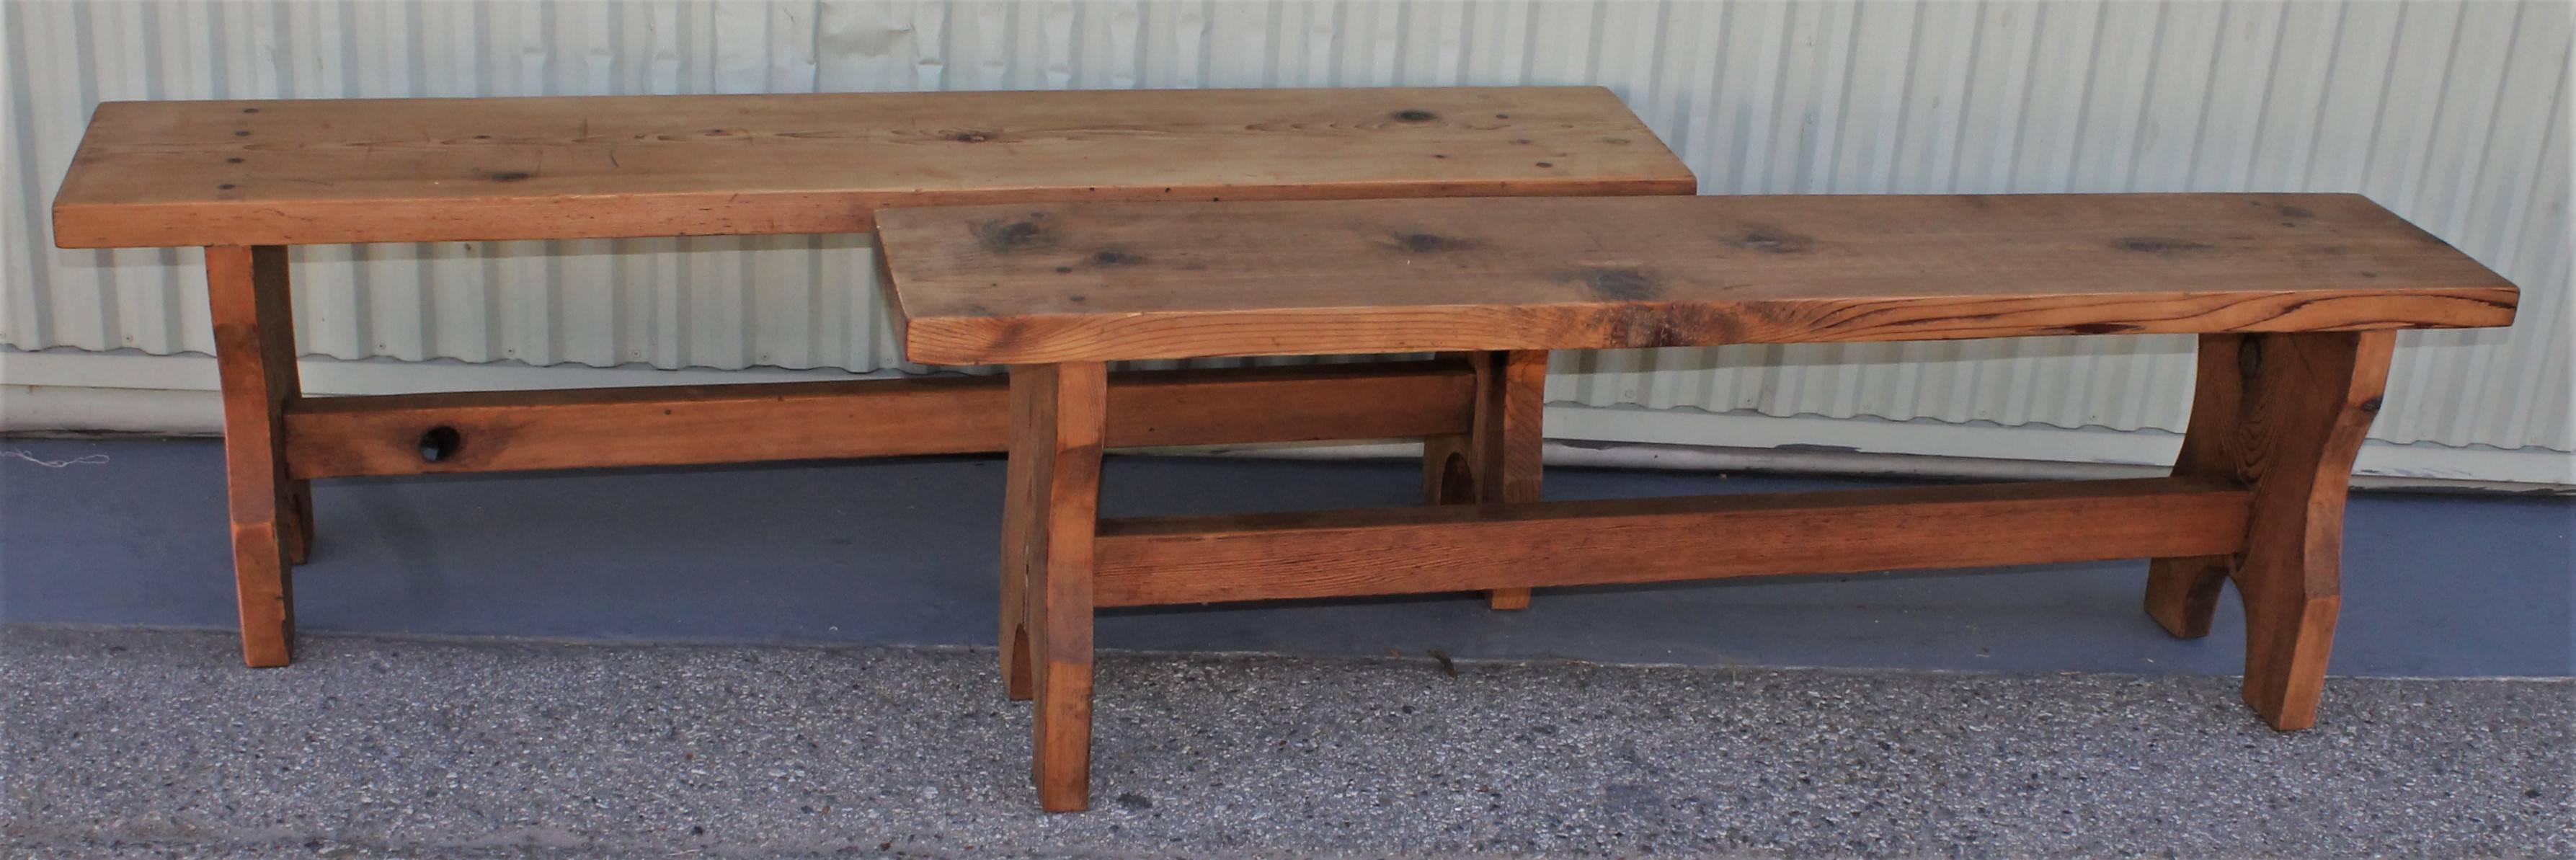 These pine Amish made farm house benches are in pristine condition and very strong and sturdy. They are perfect at a farm table for seating. Great natural surface with wood peg construction.